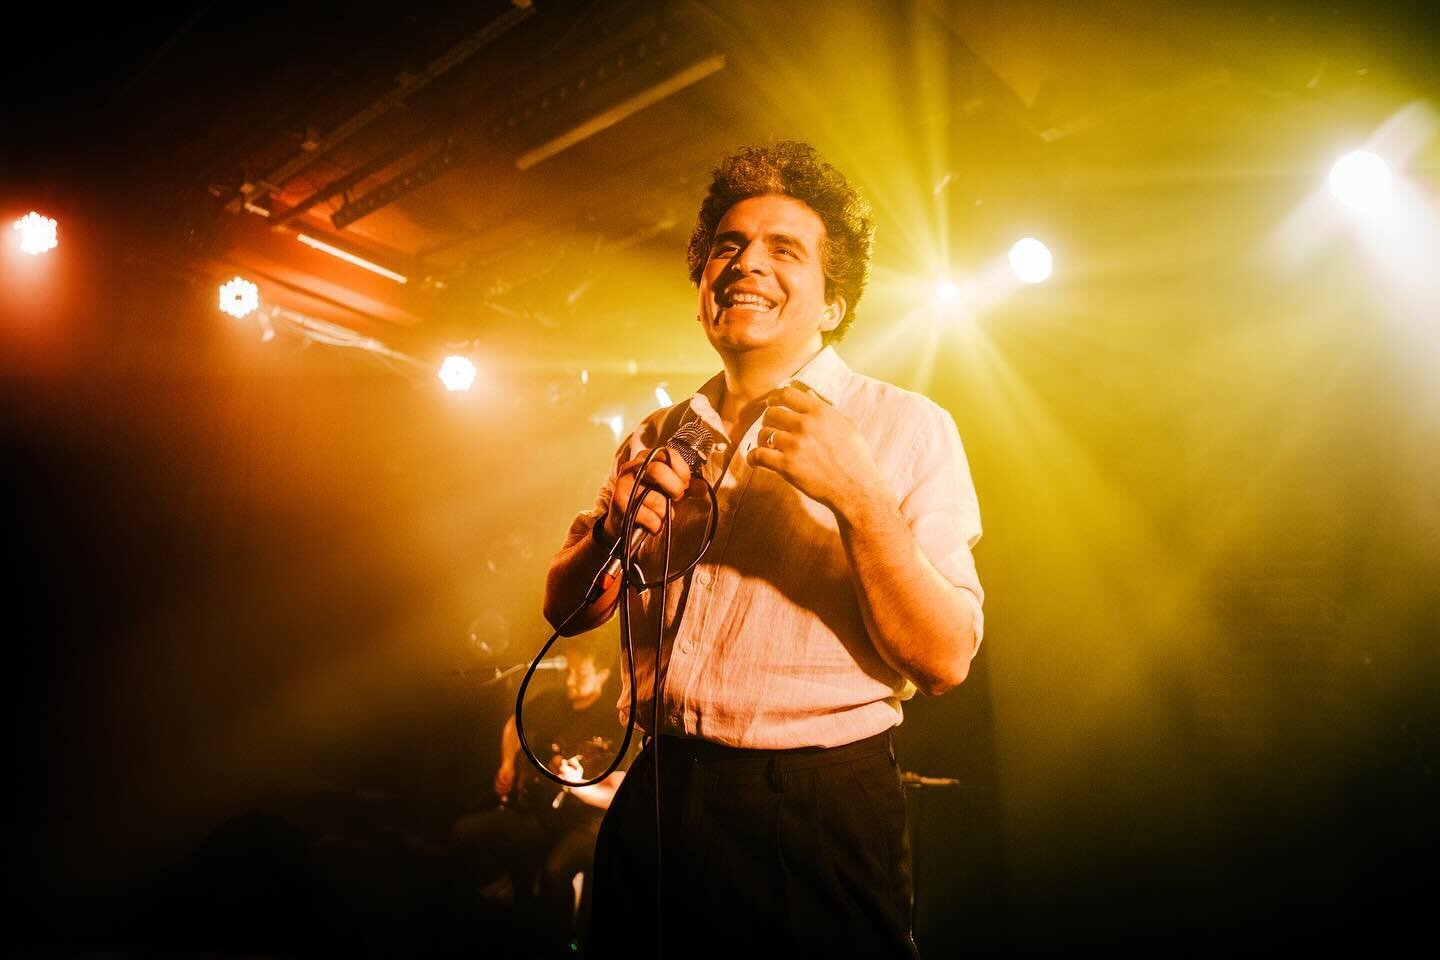 @heladonegro bringing all the good vibes @lamaroquinerie in Paris a few days ago. 🔥 🤩